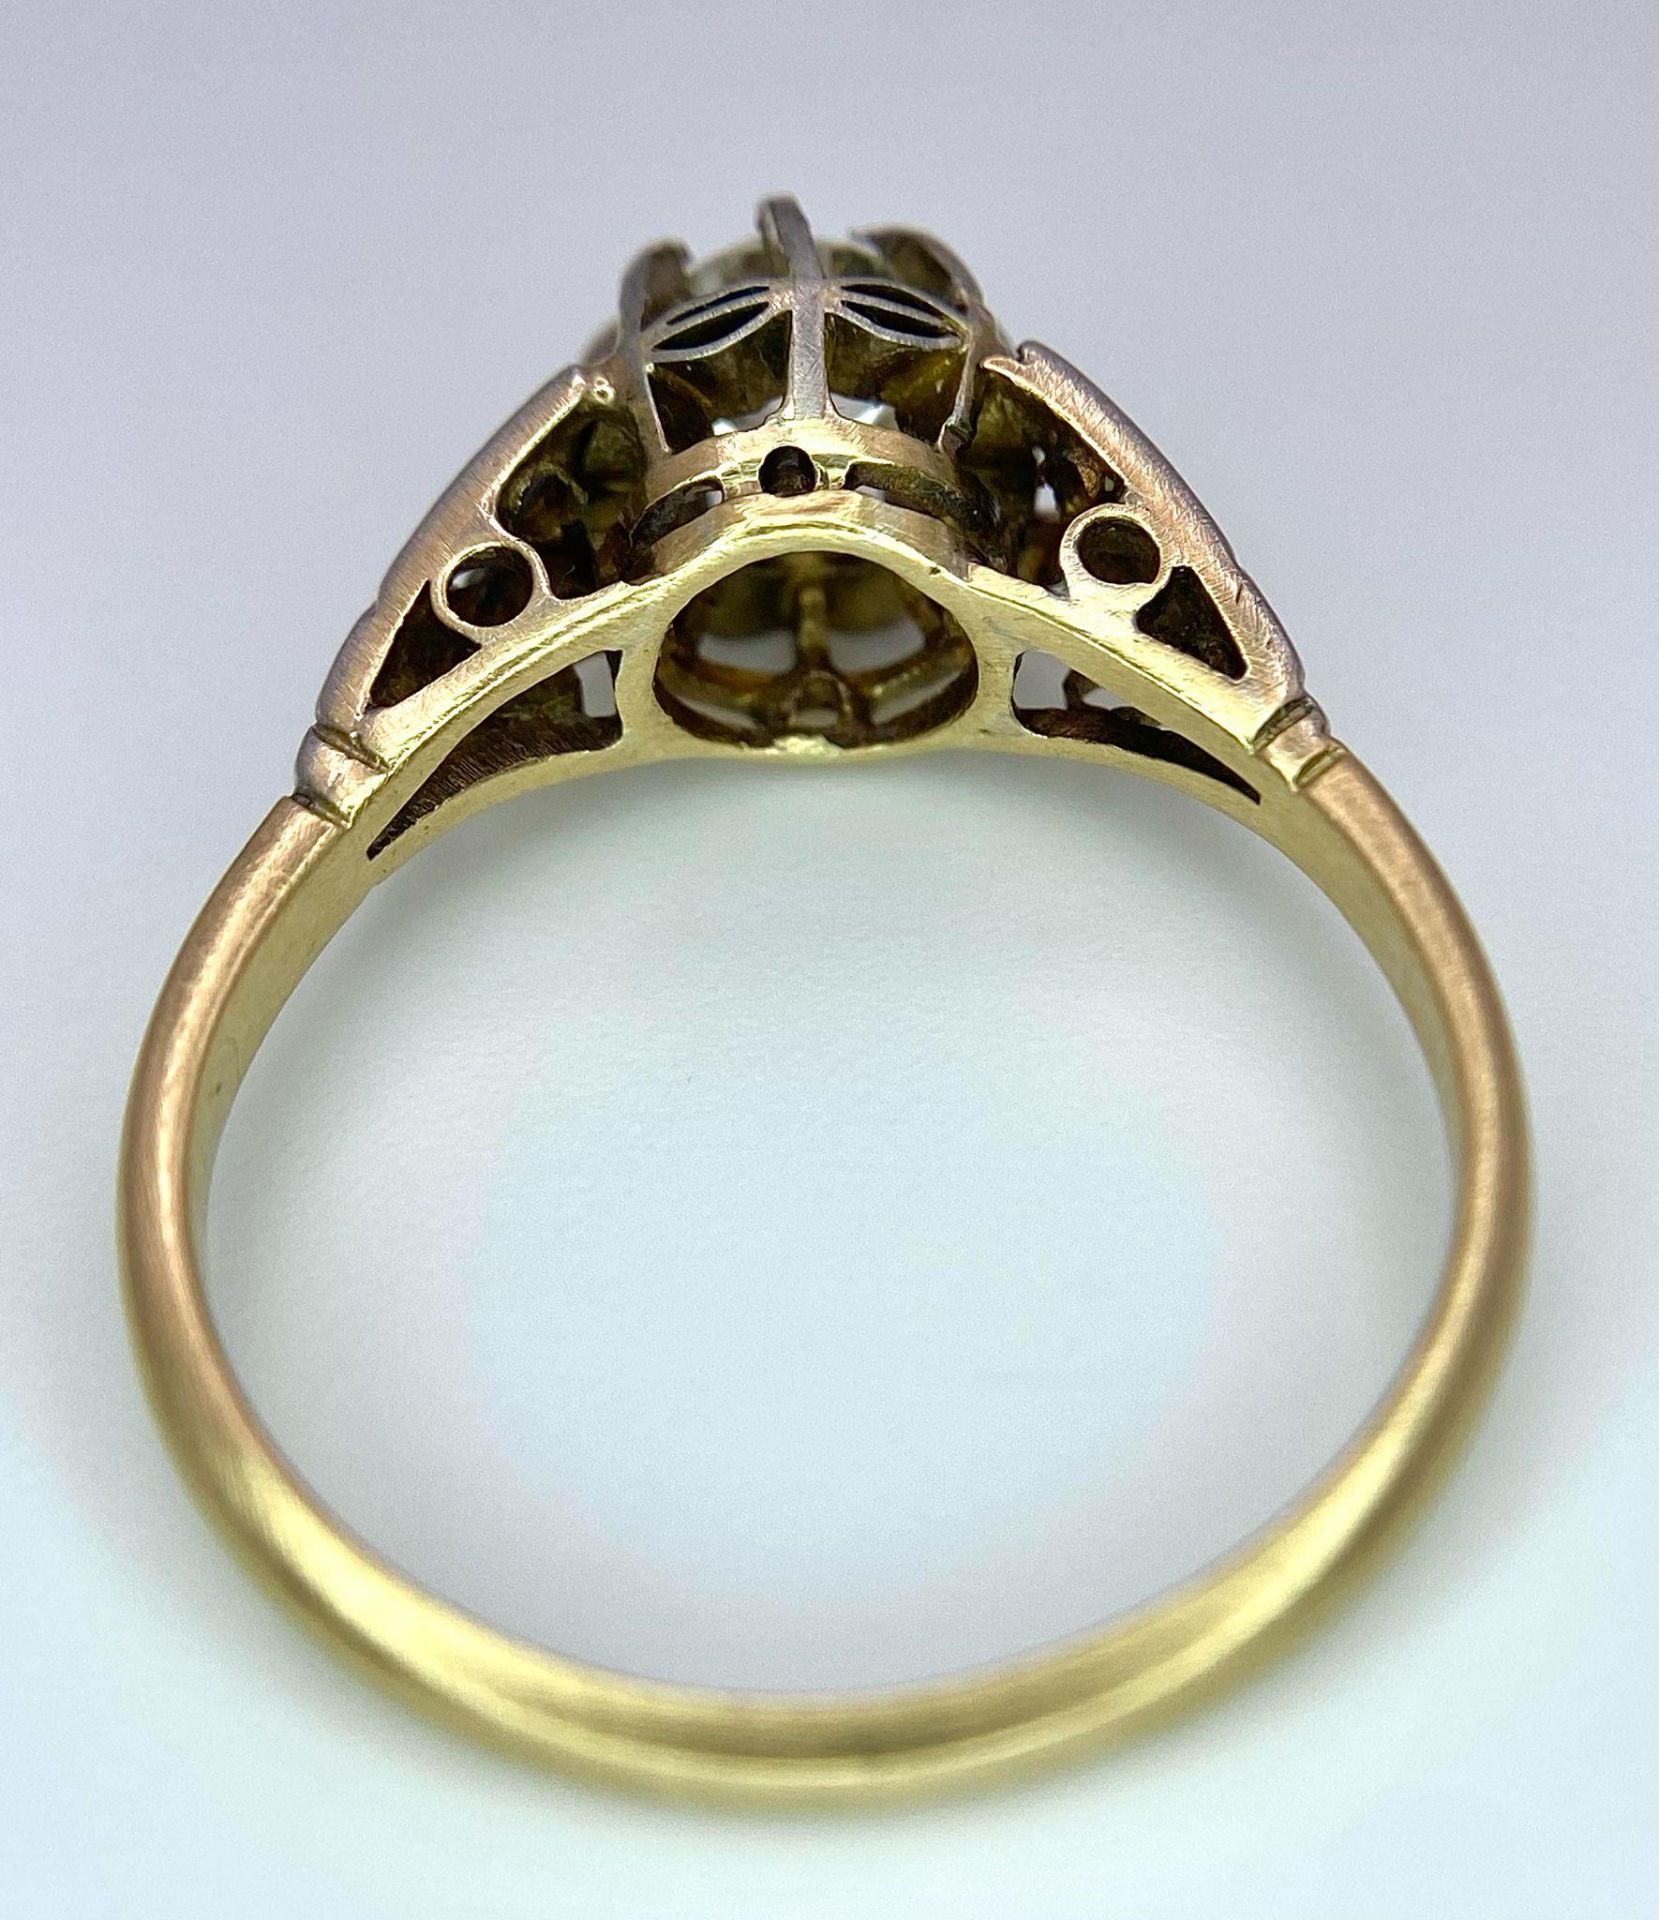 An Antique 18K Gold, Platinum and Diamond Ring. Central 0.75ct central stone with diamond accents on - Image 6 of 7